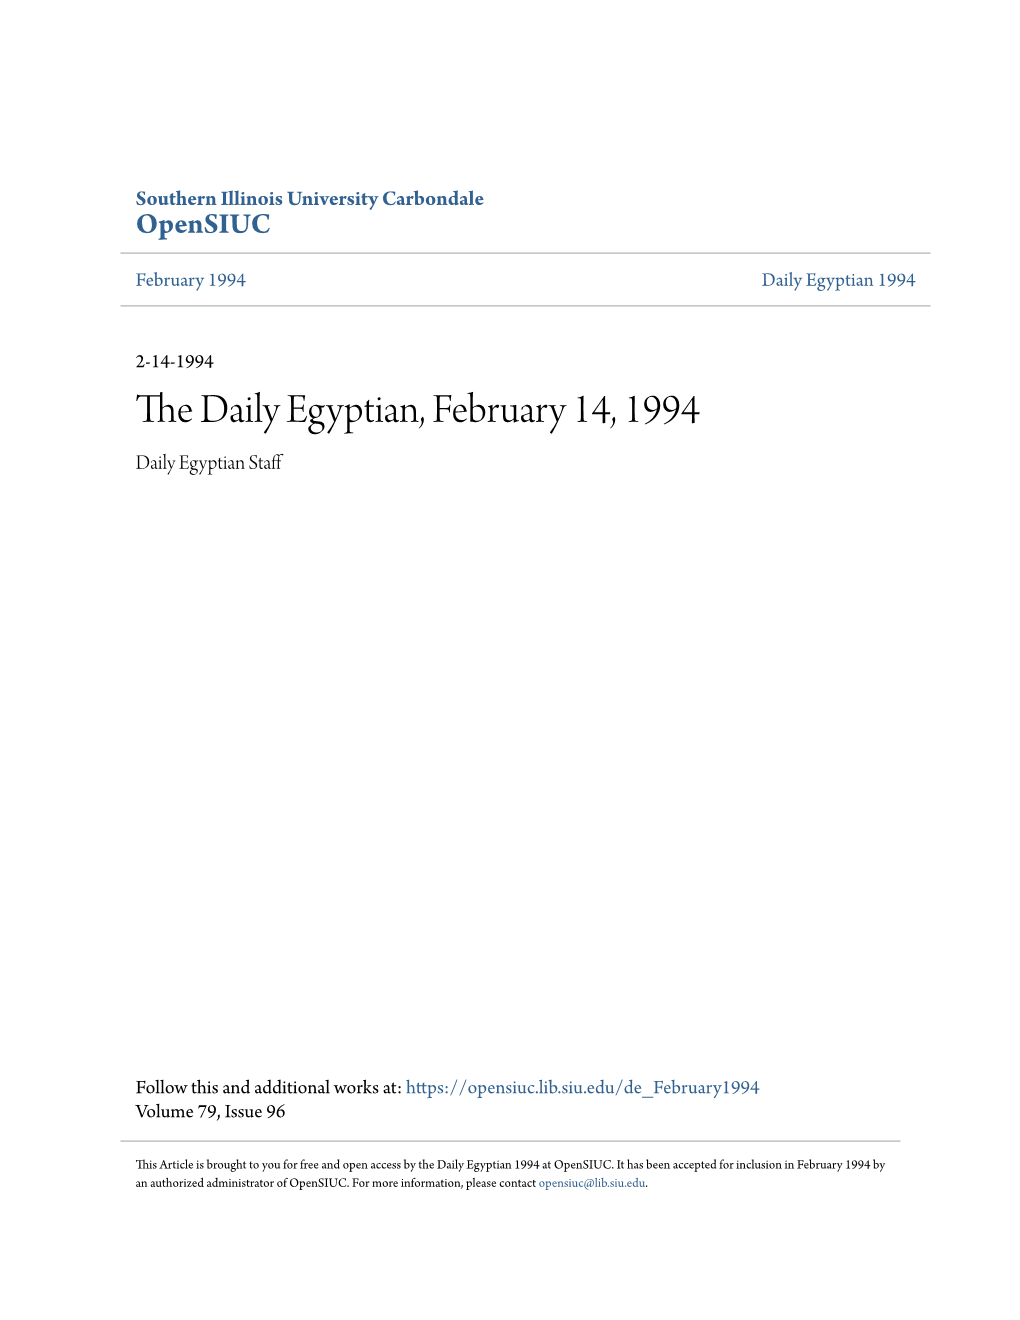 The Daily Egyptian, February 14, 1994